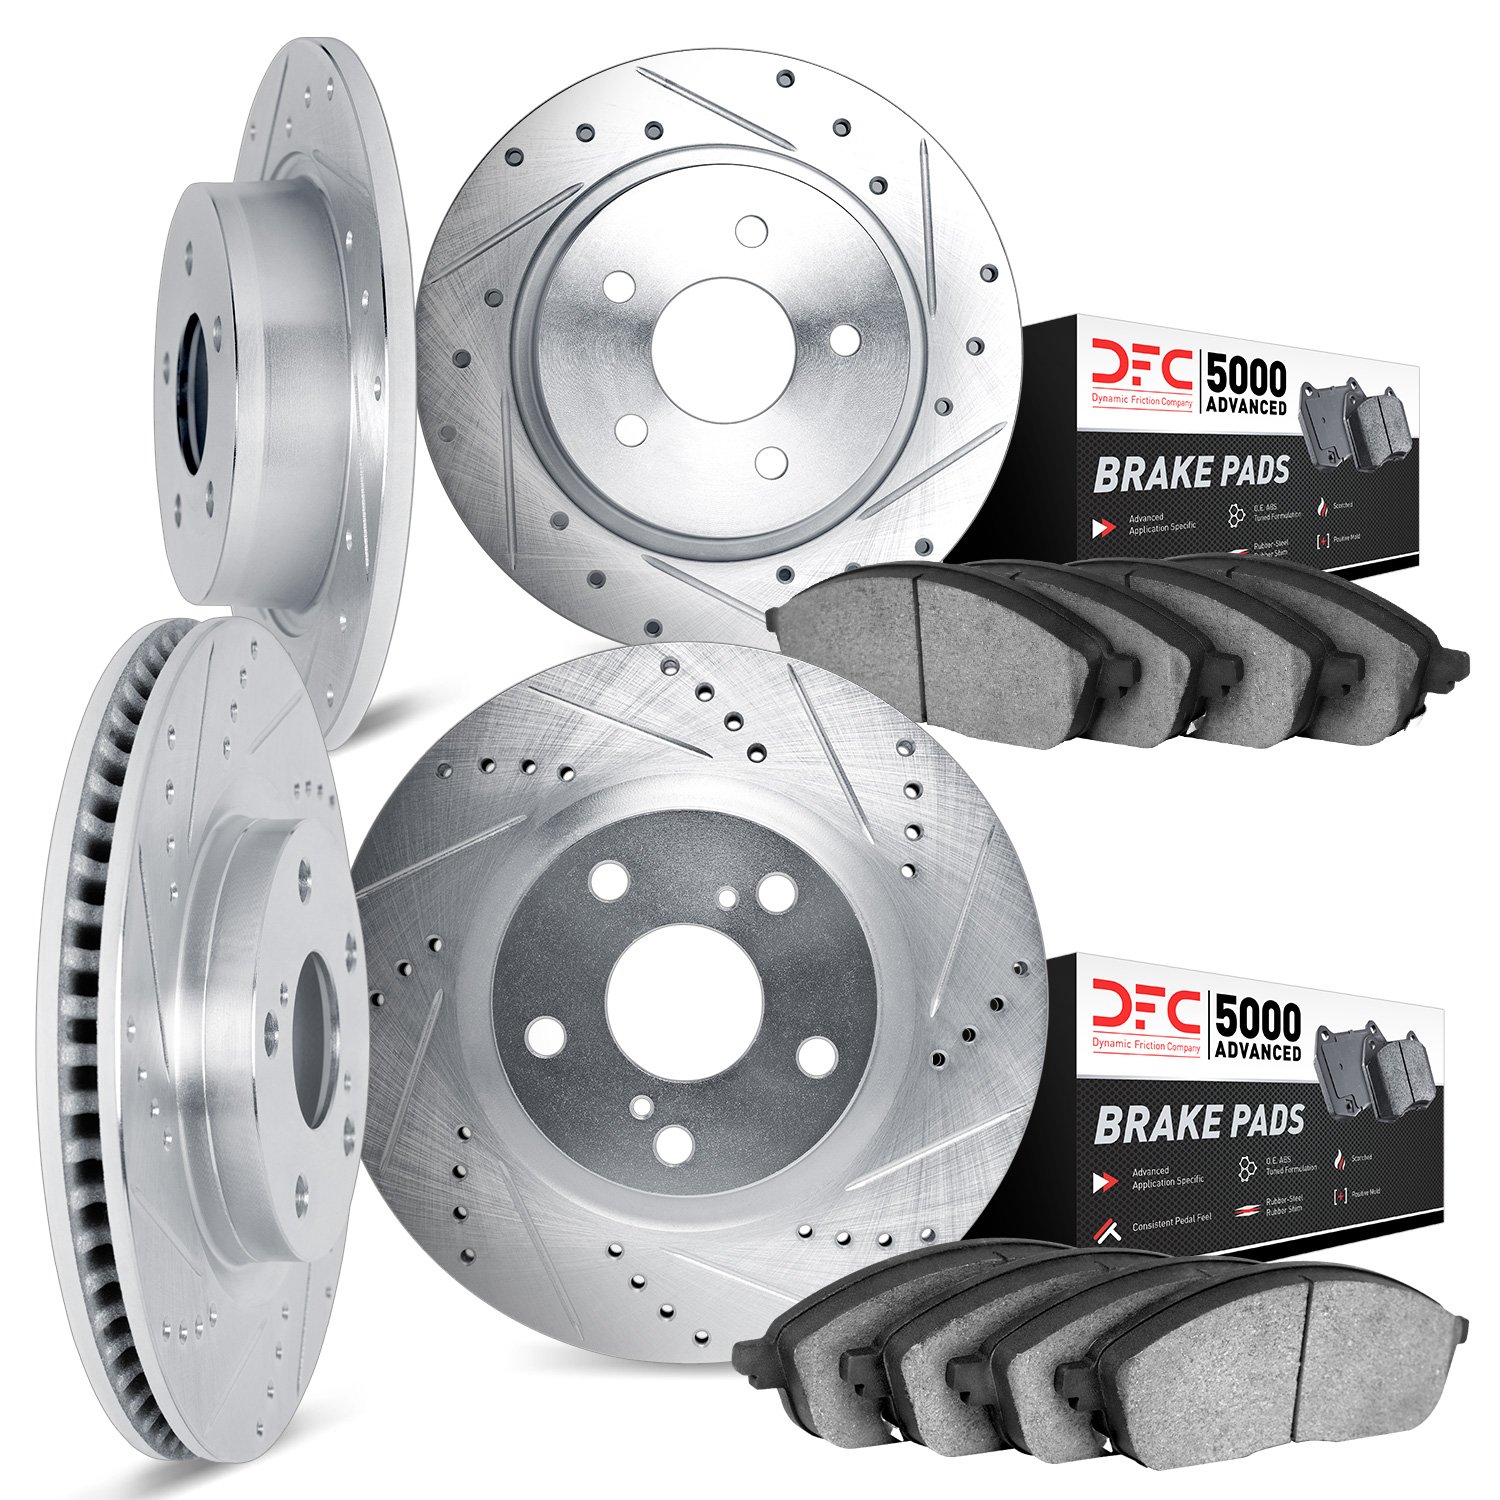 7504-67098 Drilled/Slotted Brake Rotors w/5000 Advanced Brake Pads Kit [Silver], 2005-2008 Infiniti/Nissan, Position: Front and